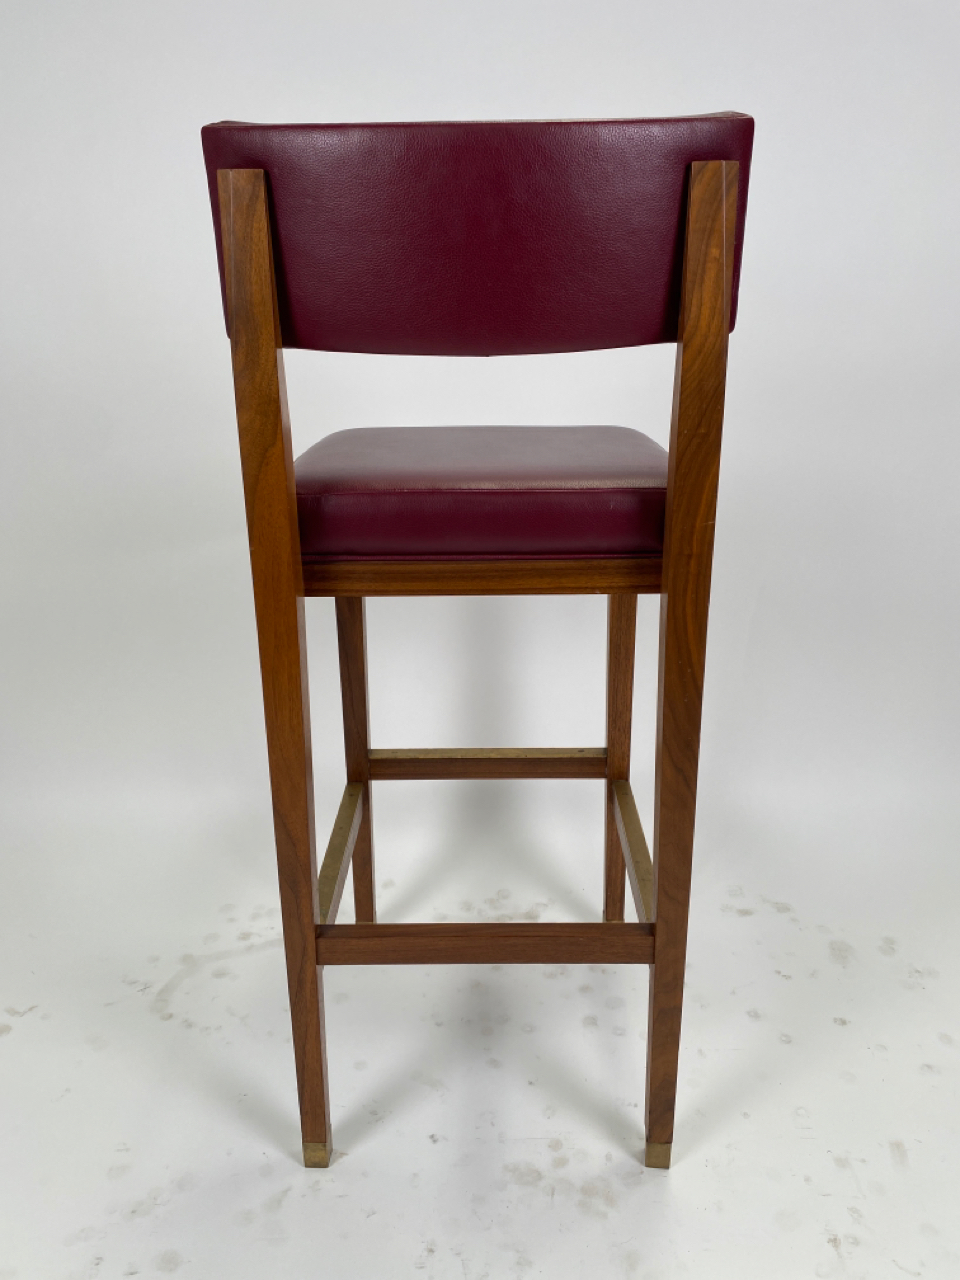 Trio of Leather Bar Stools - Image 6 of 6